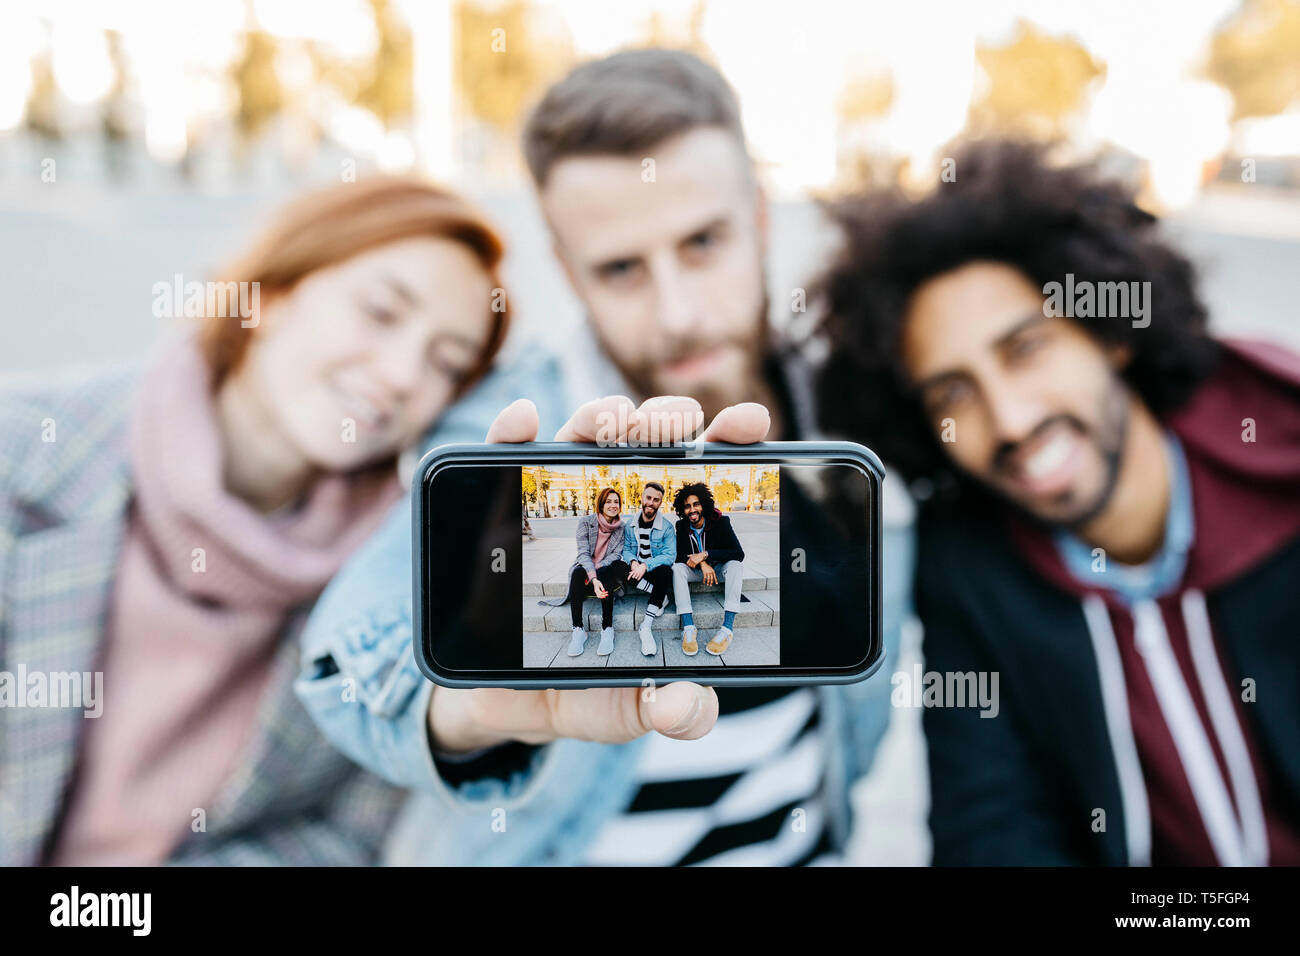 Three friends showing a selfie on camera phone Stock Photo